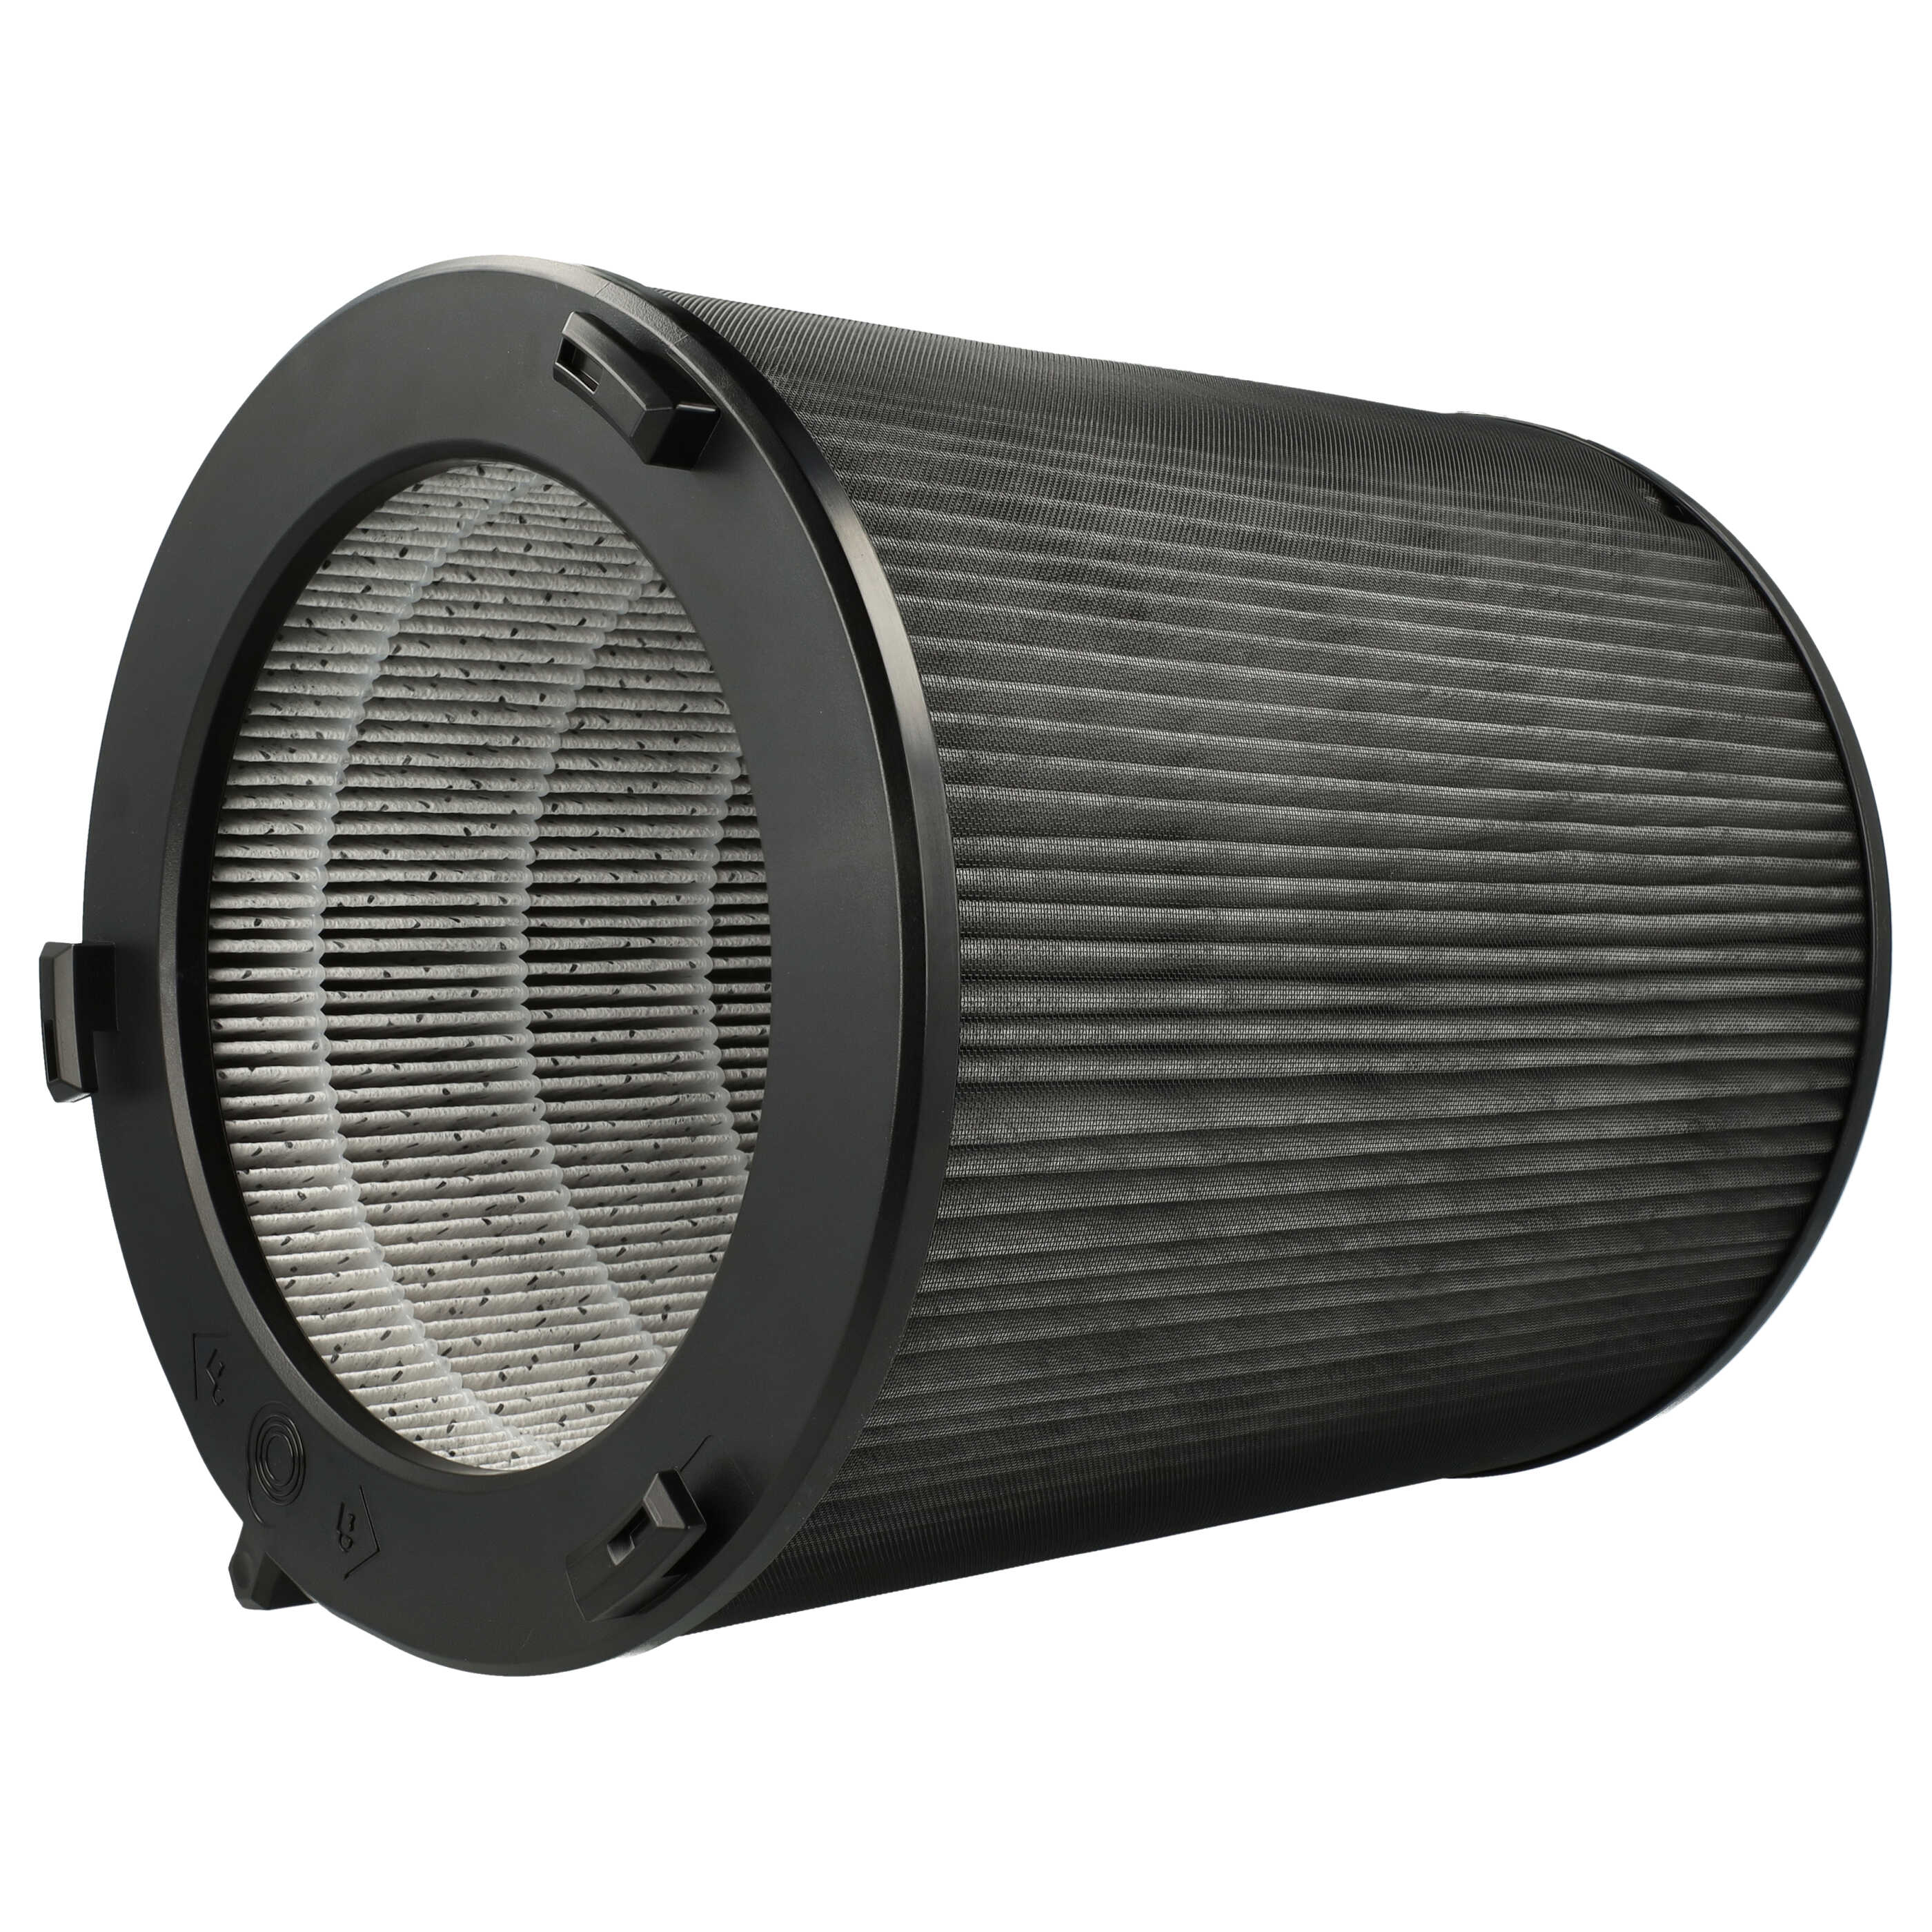 Filter for IDEAL AP30 PRO, AP40 PRO - Pre Filter + HEPA + Activated Carbon